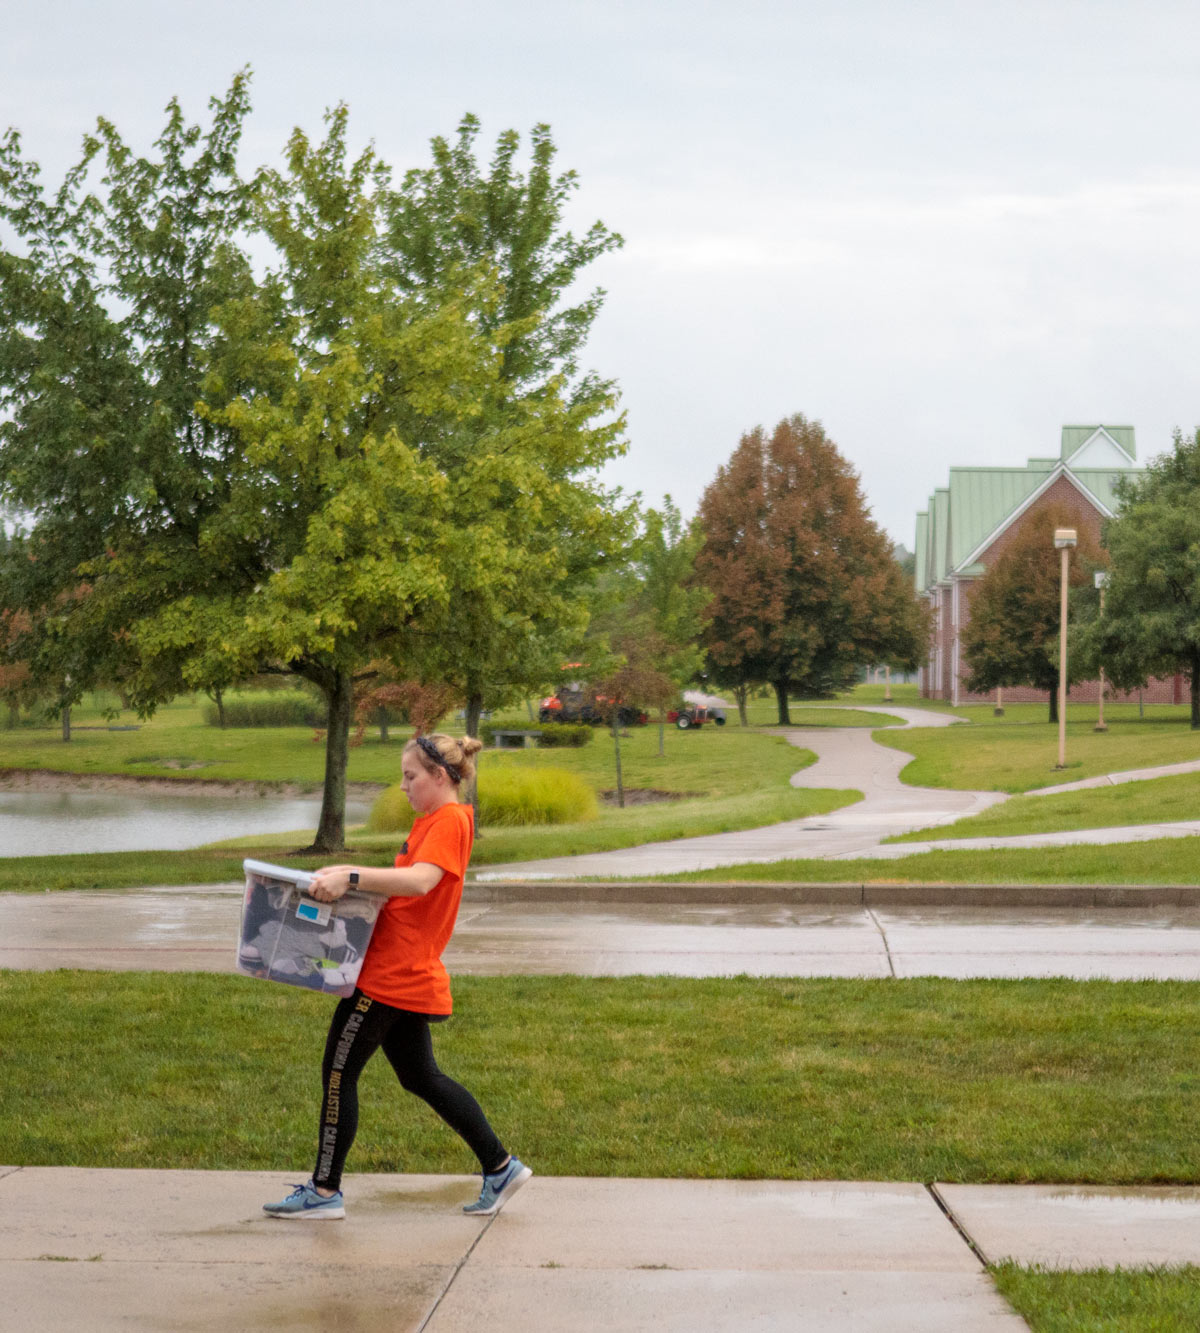 new students moved to the campus of Ohio Northern University to begin the academic year